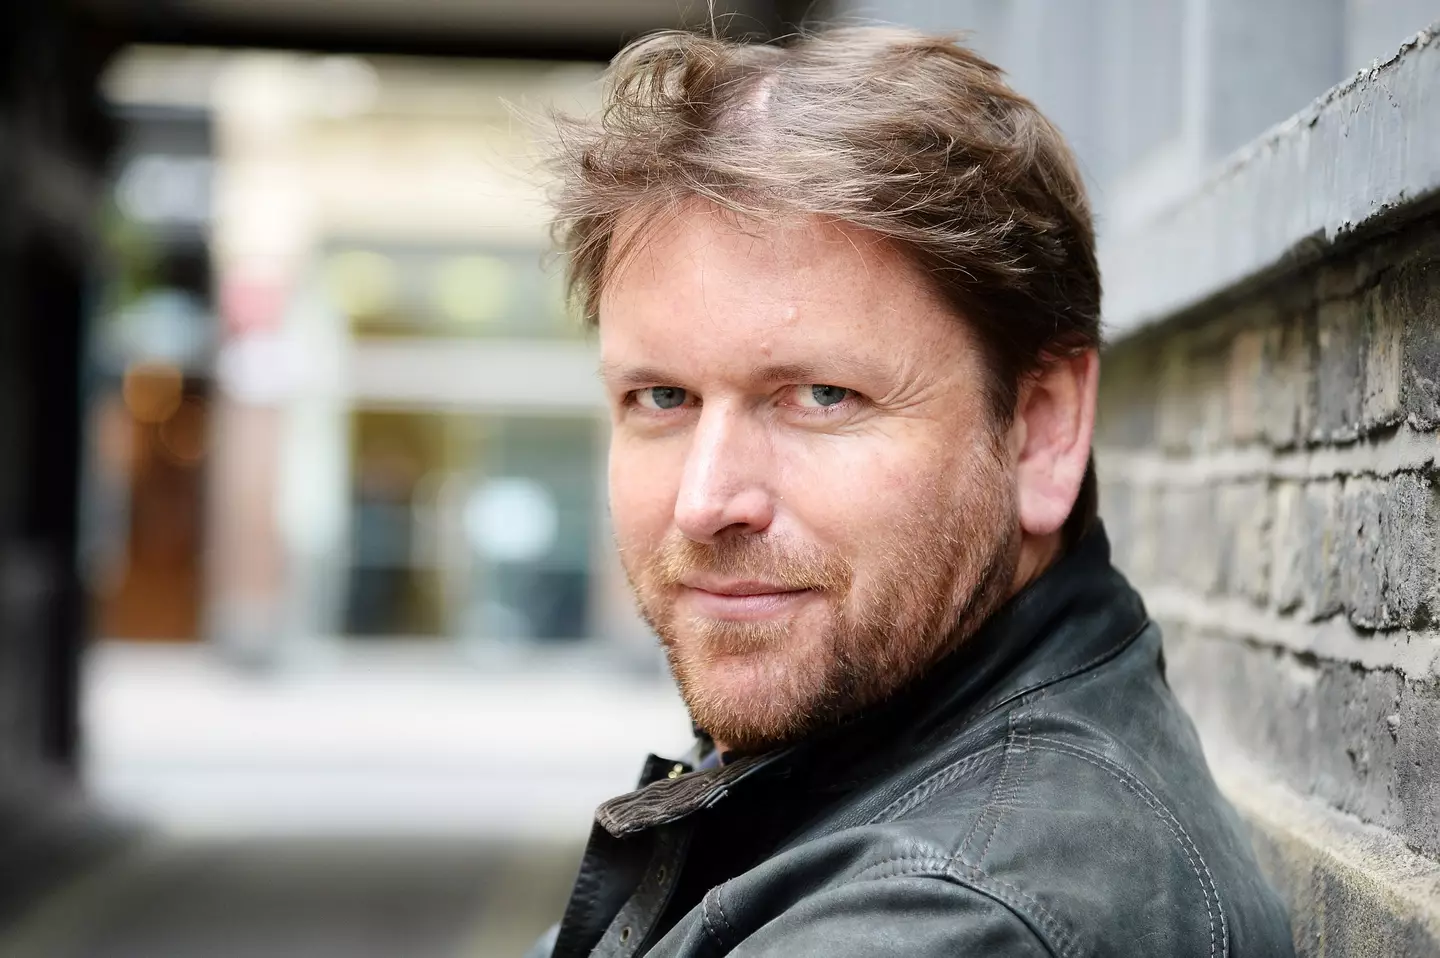 TV chef James Martin has been accused of bullying and intimidation while filming a show.